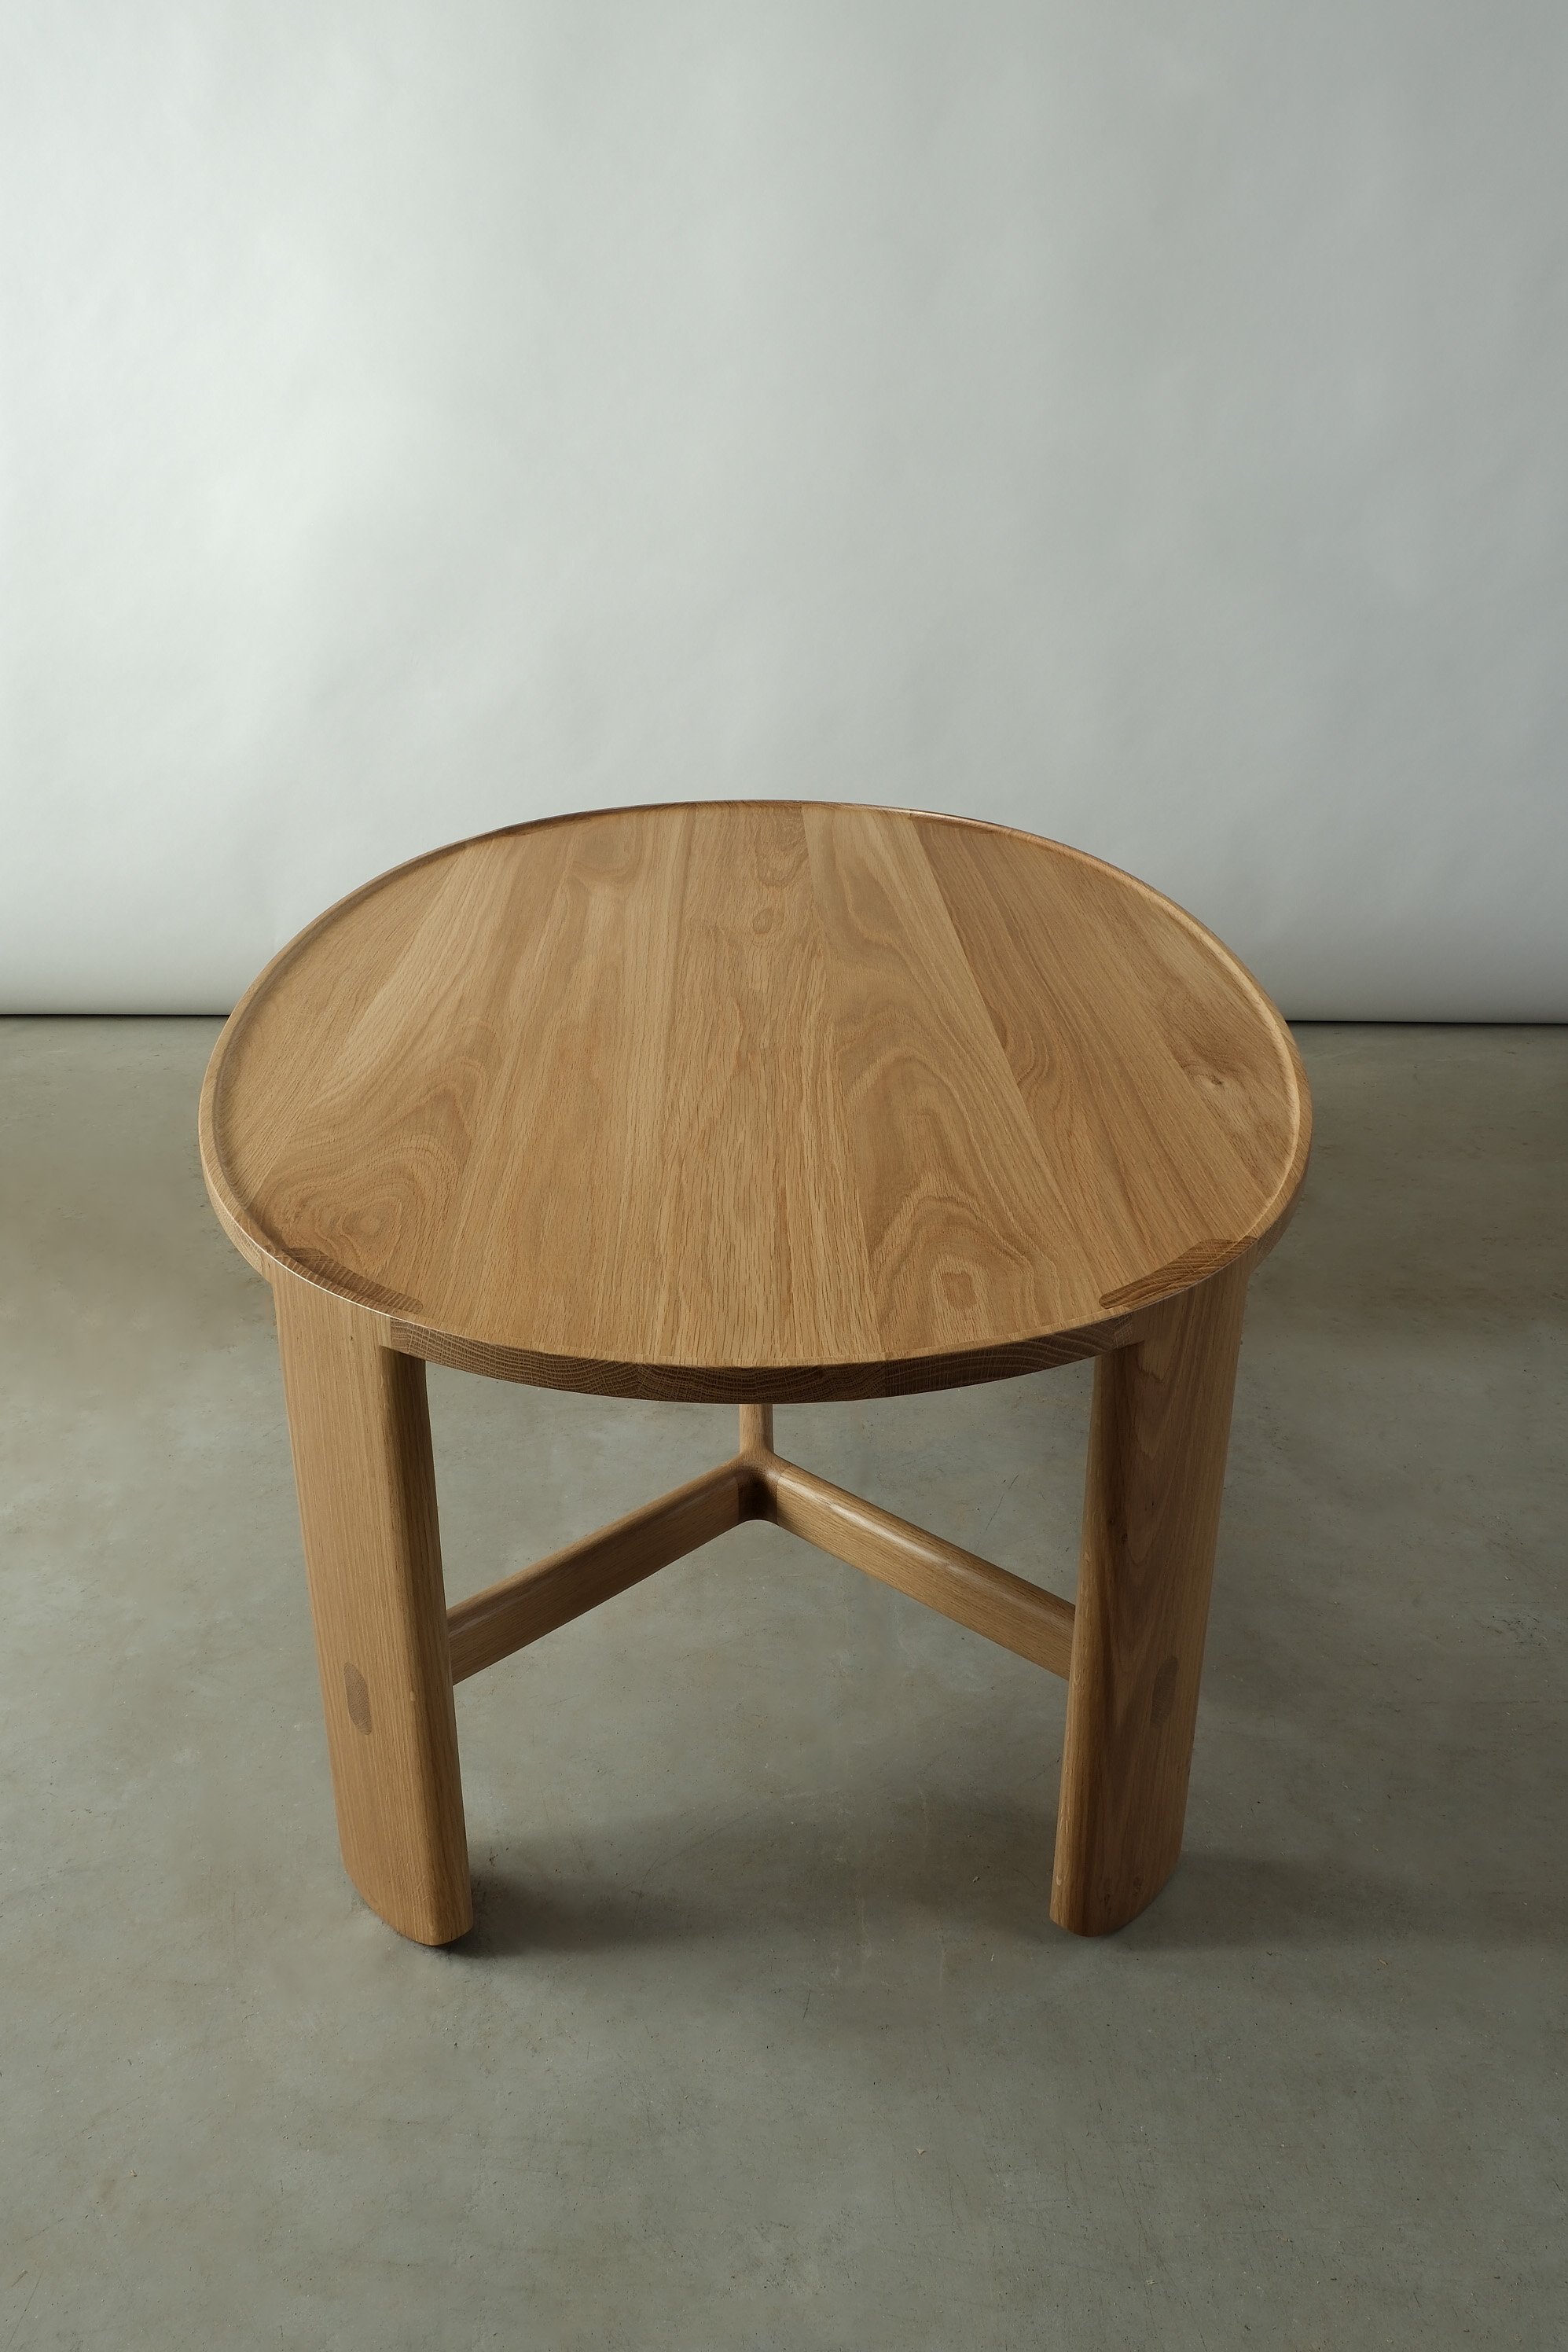 ghent low table full oval view.JPG